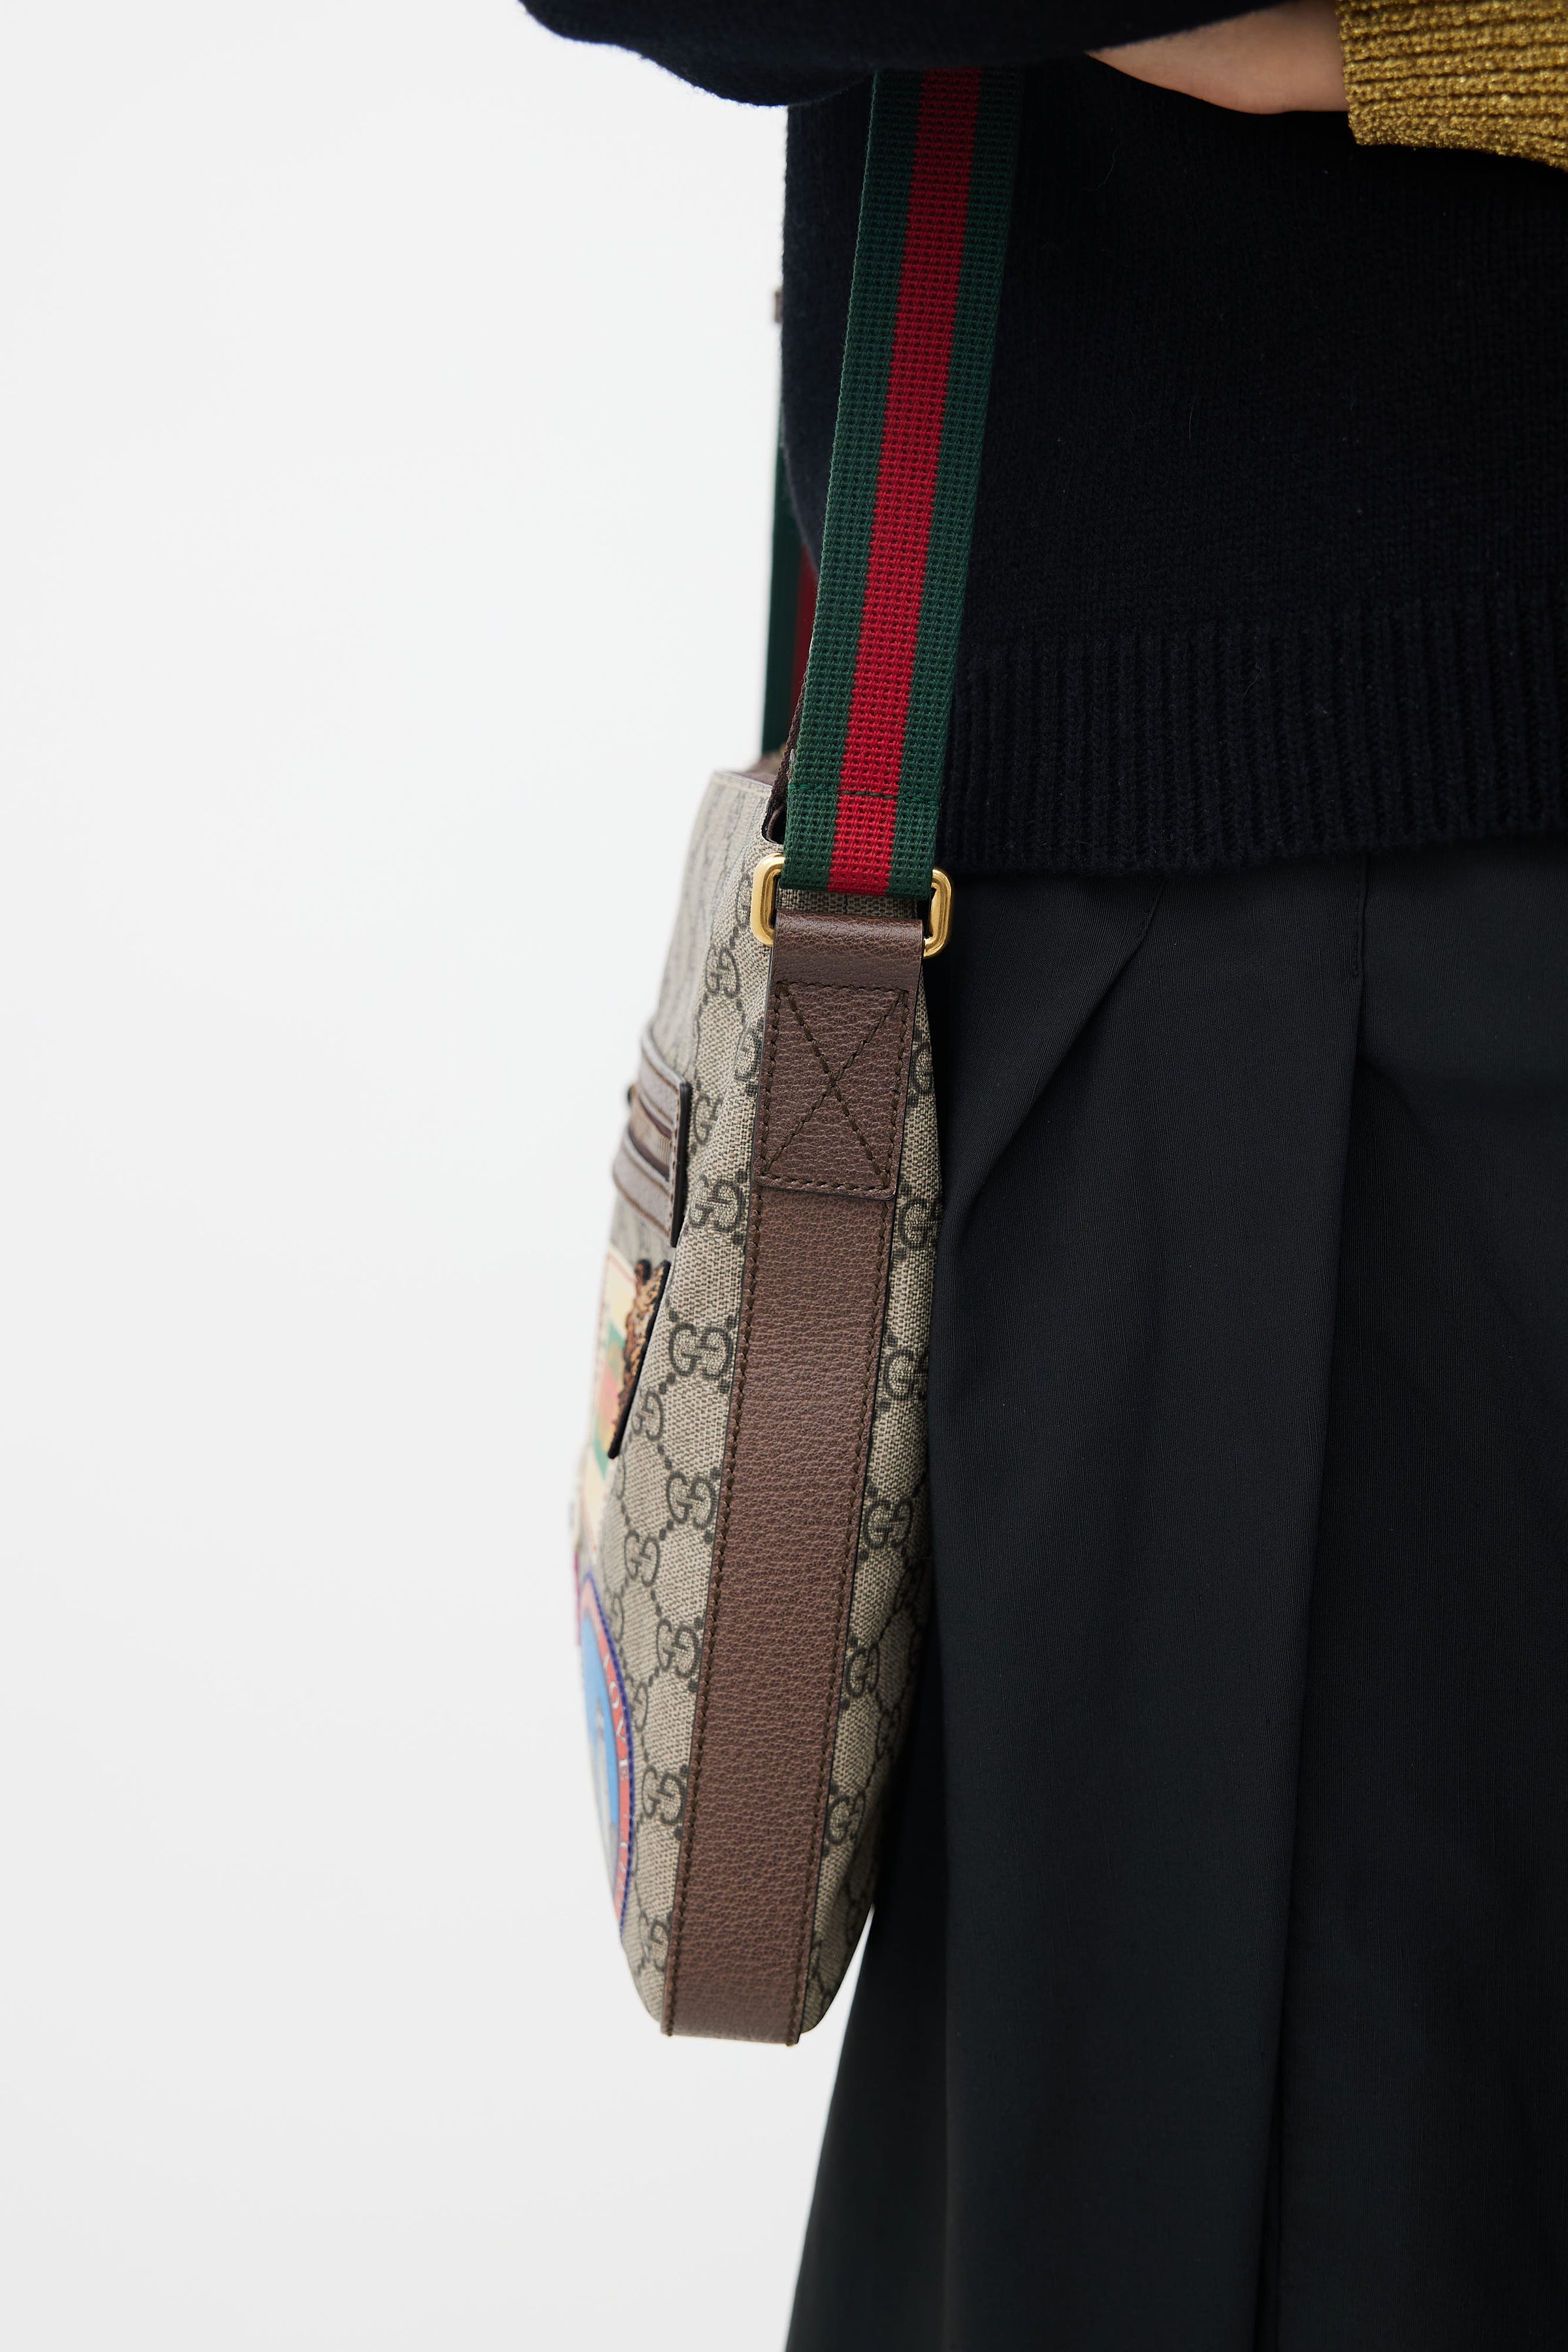 gucci gucci courrier gg supreme belt bag item - Leggings with